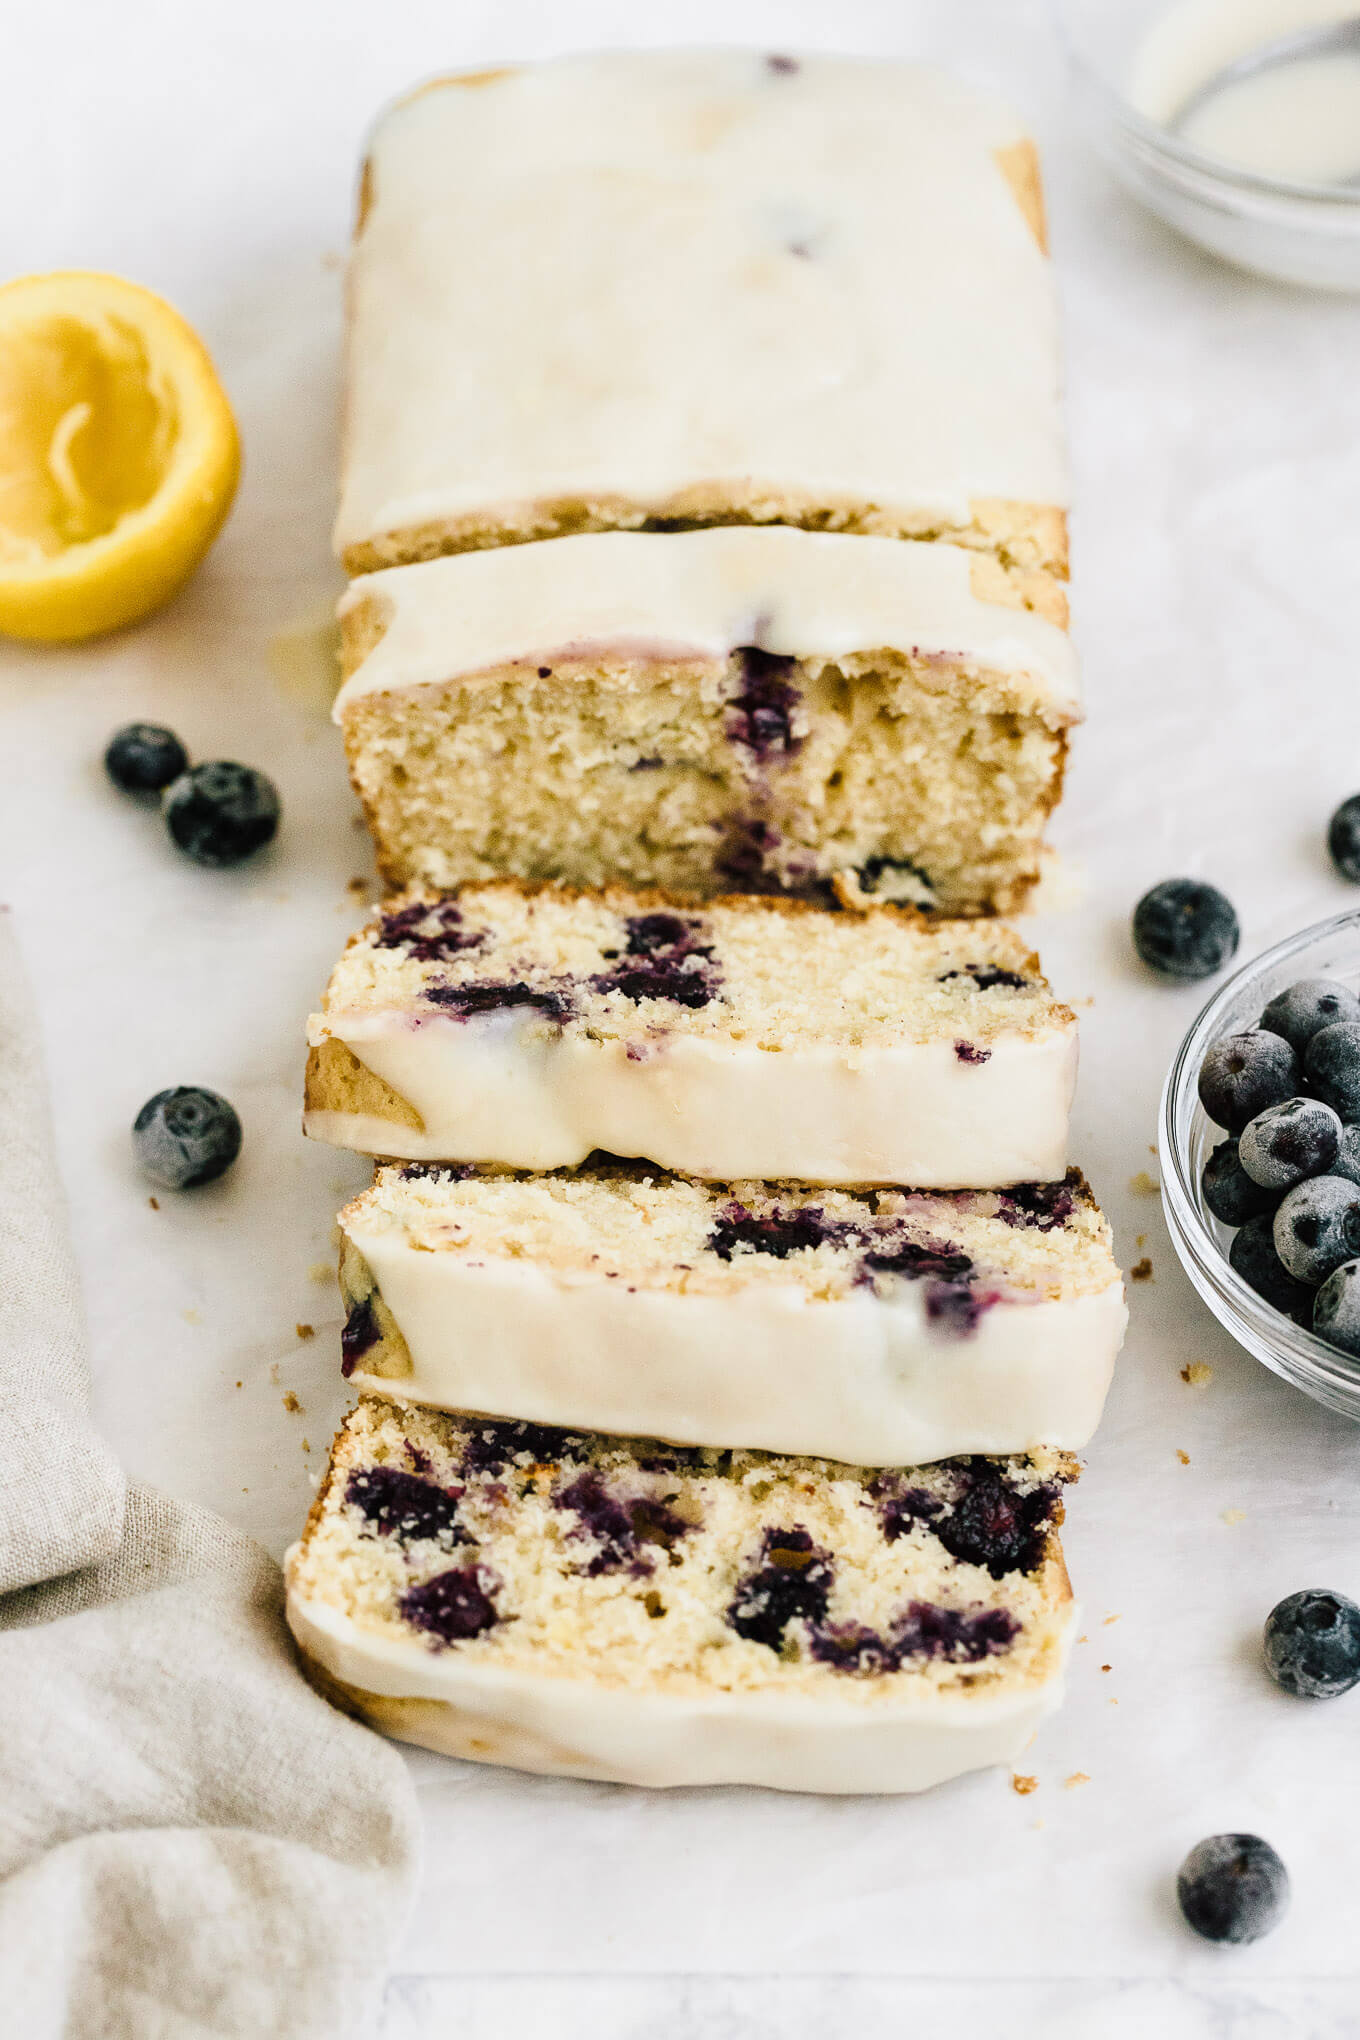 Healthy lemon blueberry bread naturally sweetened with maple syrup and topped with a sweet lemon glaze sliced